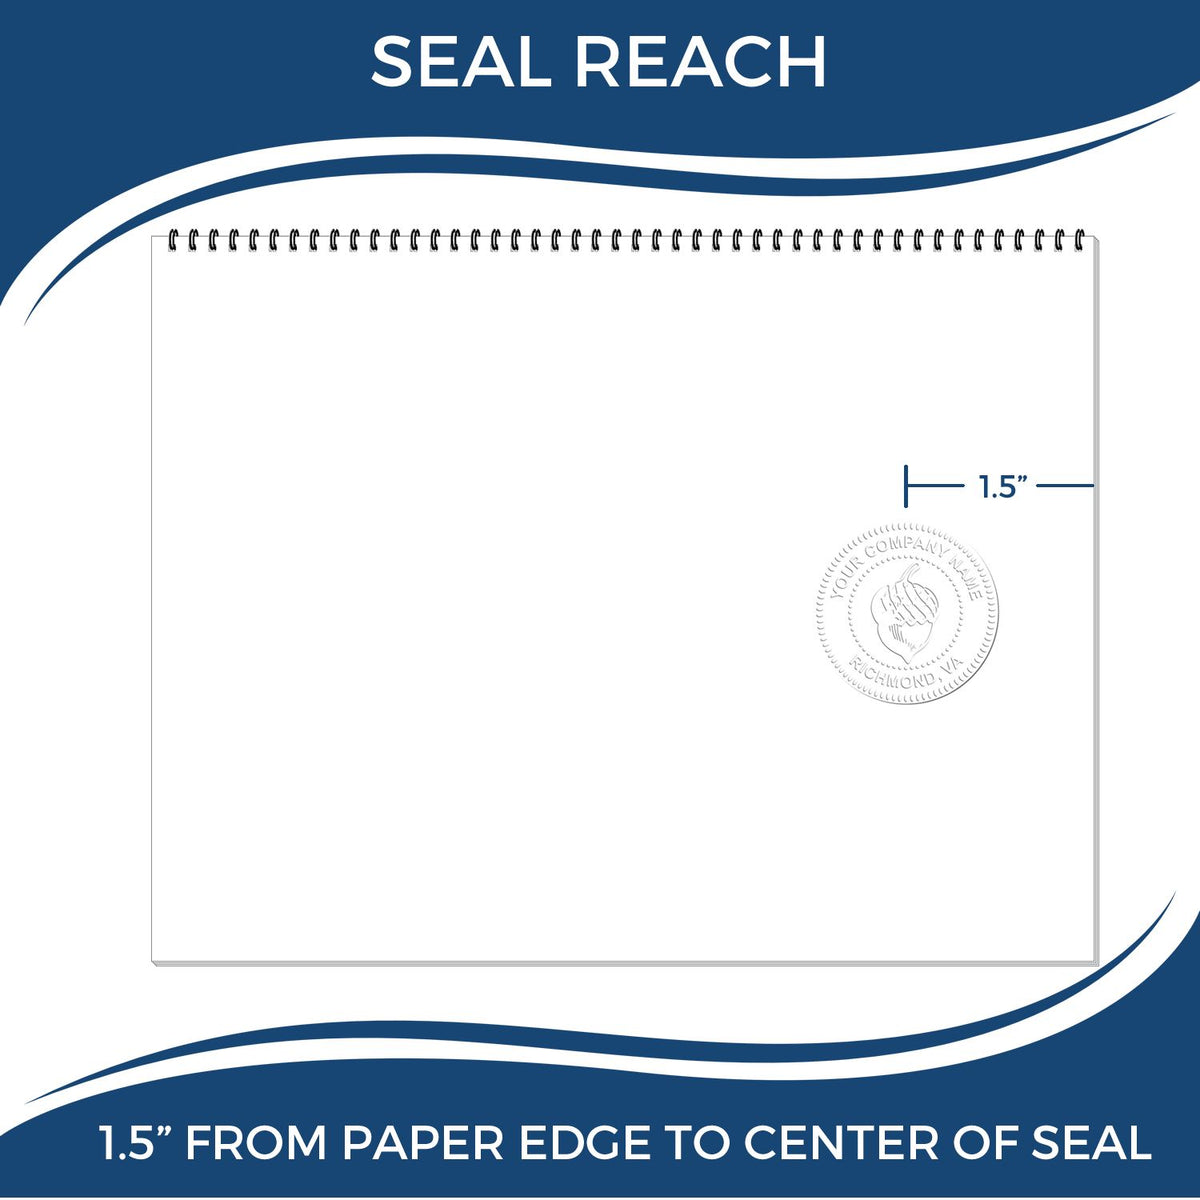 An infographic showing the seal reach which is represented by a ruler and a miniature seal image of the Soft Pocket Virginia Landscape Architect Embosser